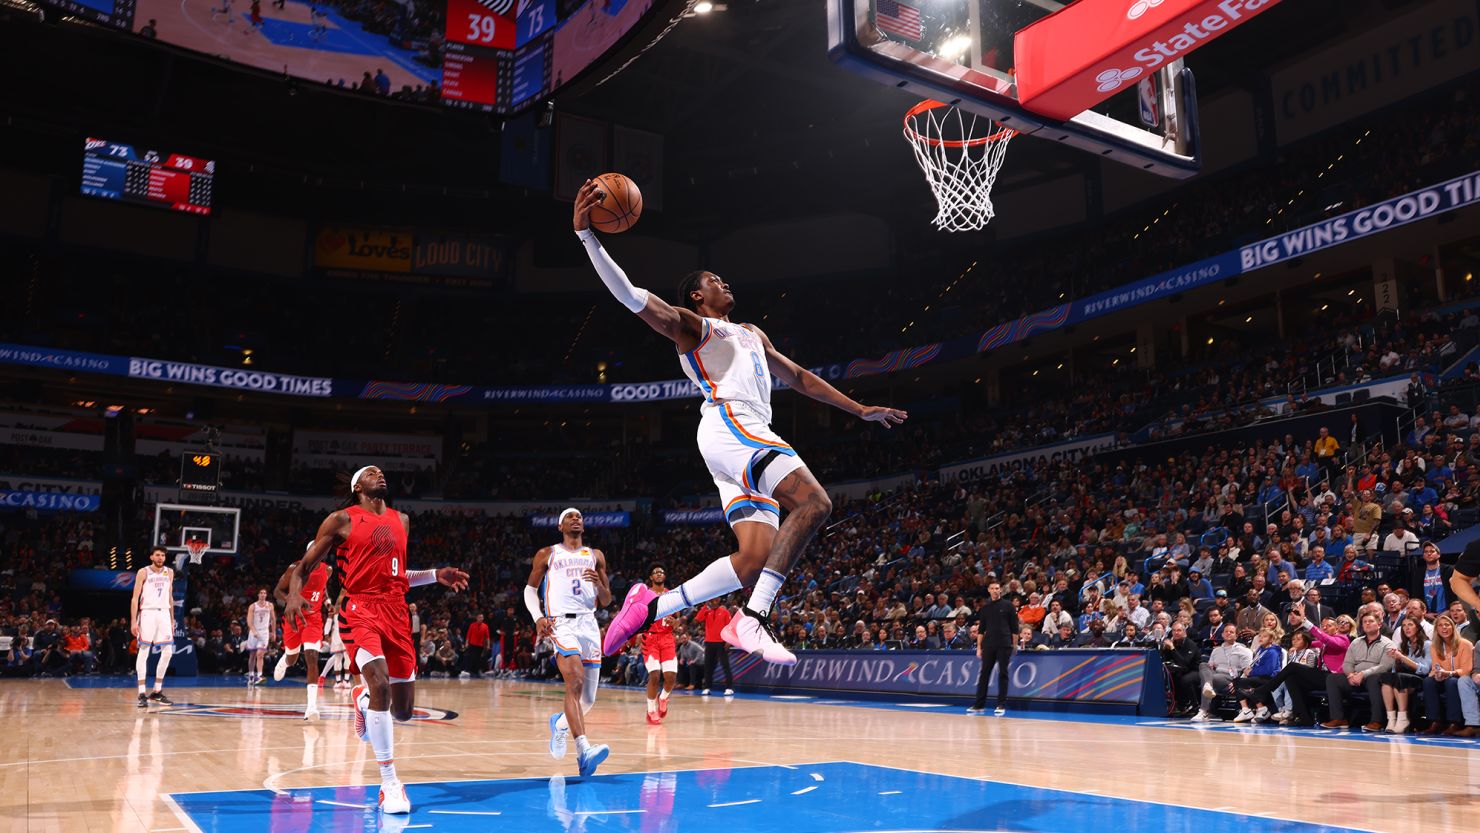 OKLAHOMA CITY, OK - JANUARY 11: Jalen Williams #8 of the Oklahoma City Thunder dunks the ball during the game against the Portland Trail Blazers on January 11, 2024 at Paycom Arena in Oklahoma City, Oklahoma. NOTE TO USER: User expressly acknowledges and agrees that, by downloading and or using this photograph, User is consenting to the terms and conditions of the Getty Images License Agreement. Mandatory Copyright Notice: Copyright 2024 NBAE (Photo by Zach Beeker/NBAE via Getty Images)